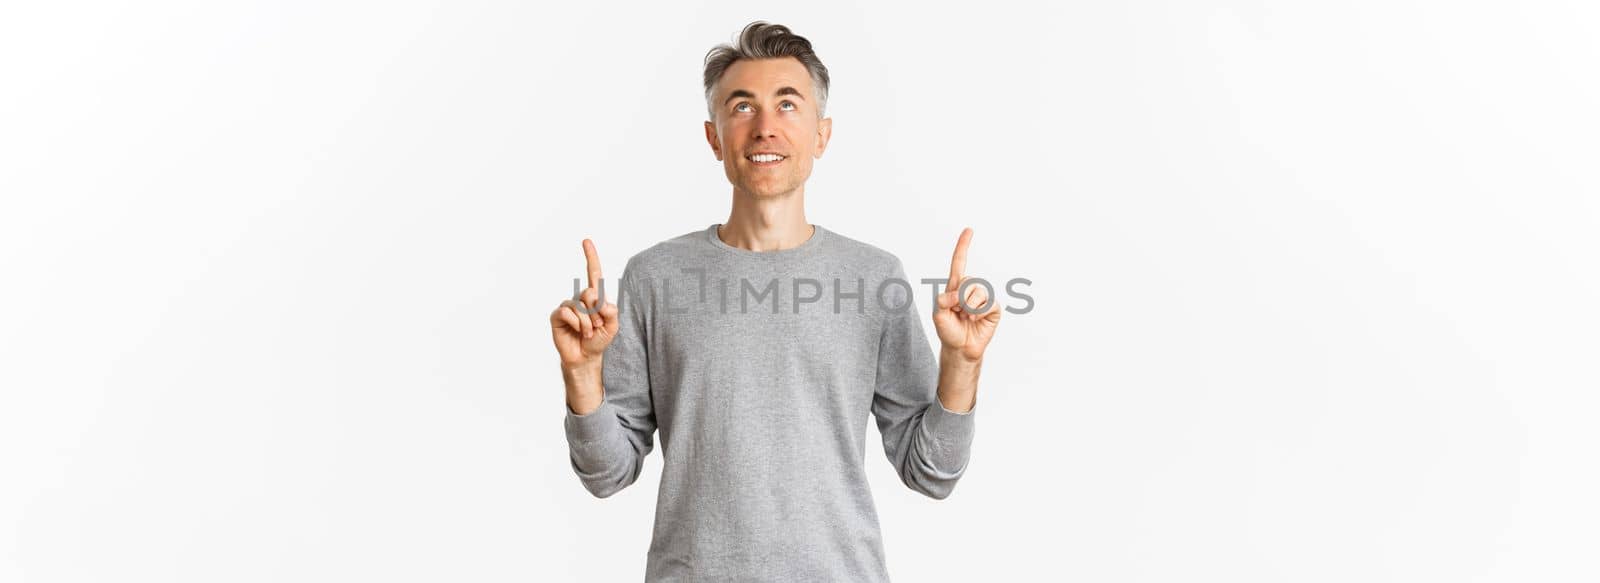 Portrait of smiling handsome man with short hair hair, looking and pointing fingers up at something interesting, reading an advertisement, standing over white background.